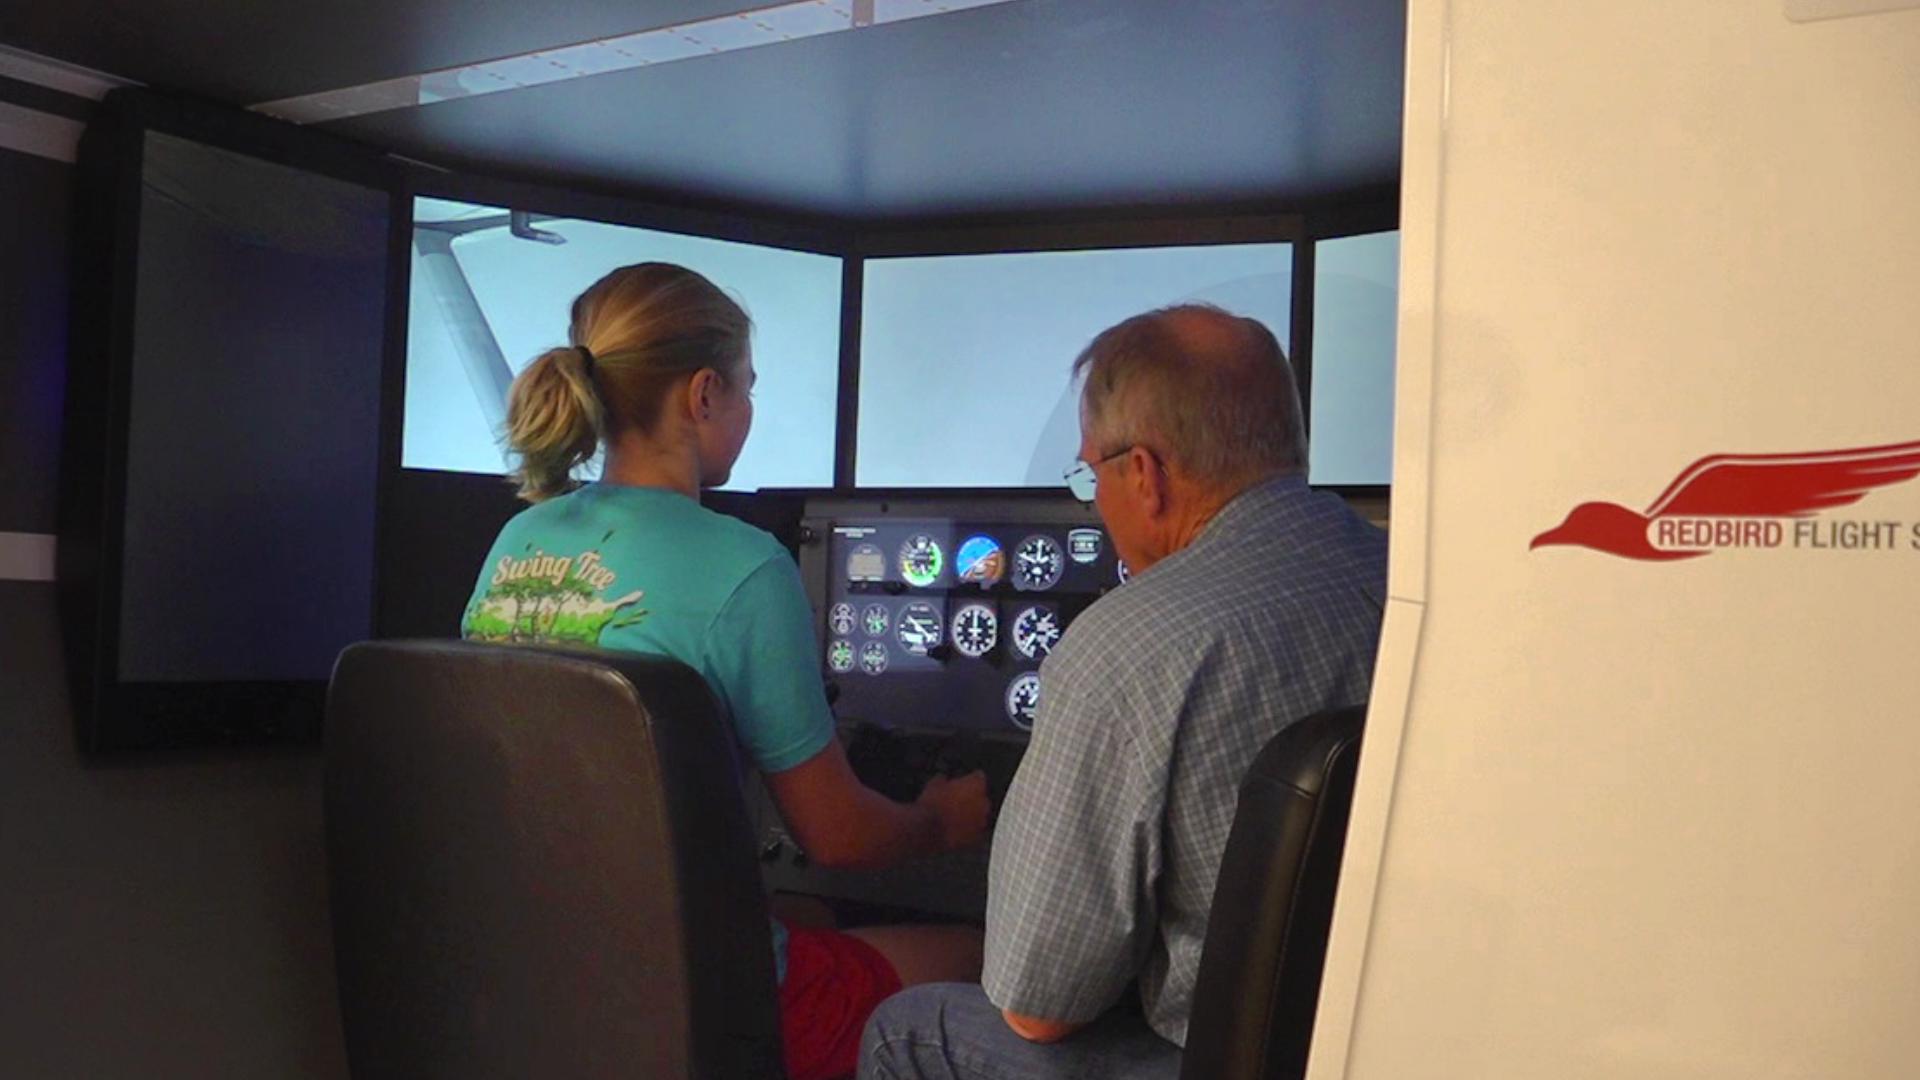 Some students in Snyder County are learning about what it takes to work in aviation. A dozen students participated in a four-day camp at the Penn Valley Airport.